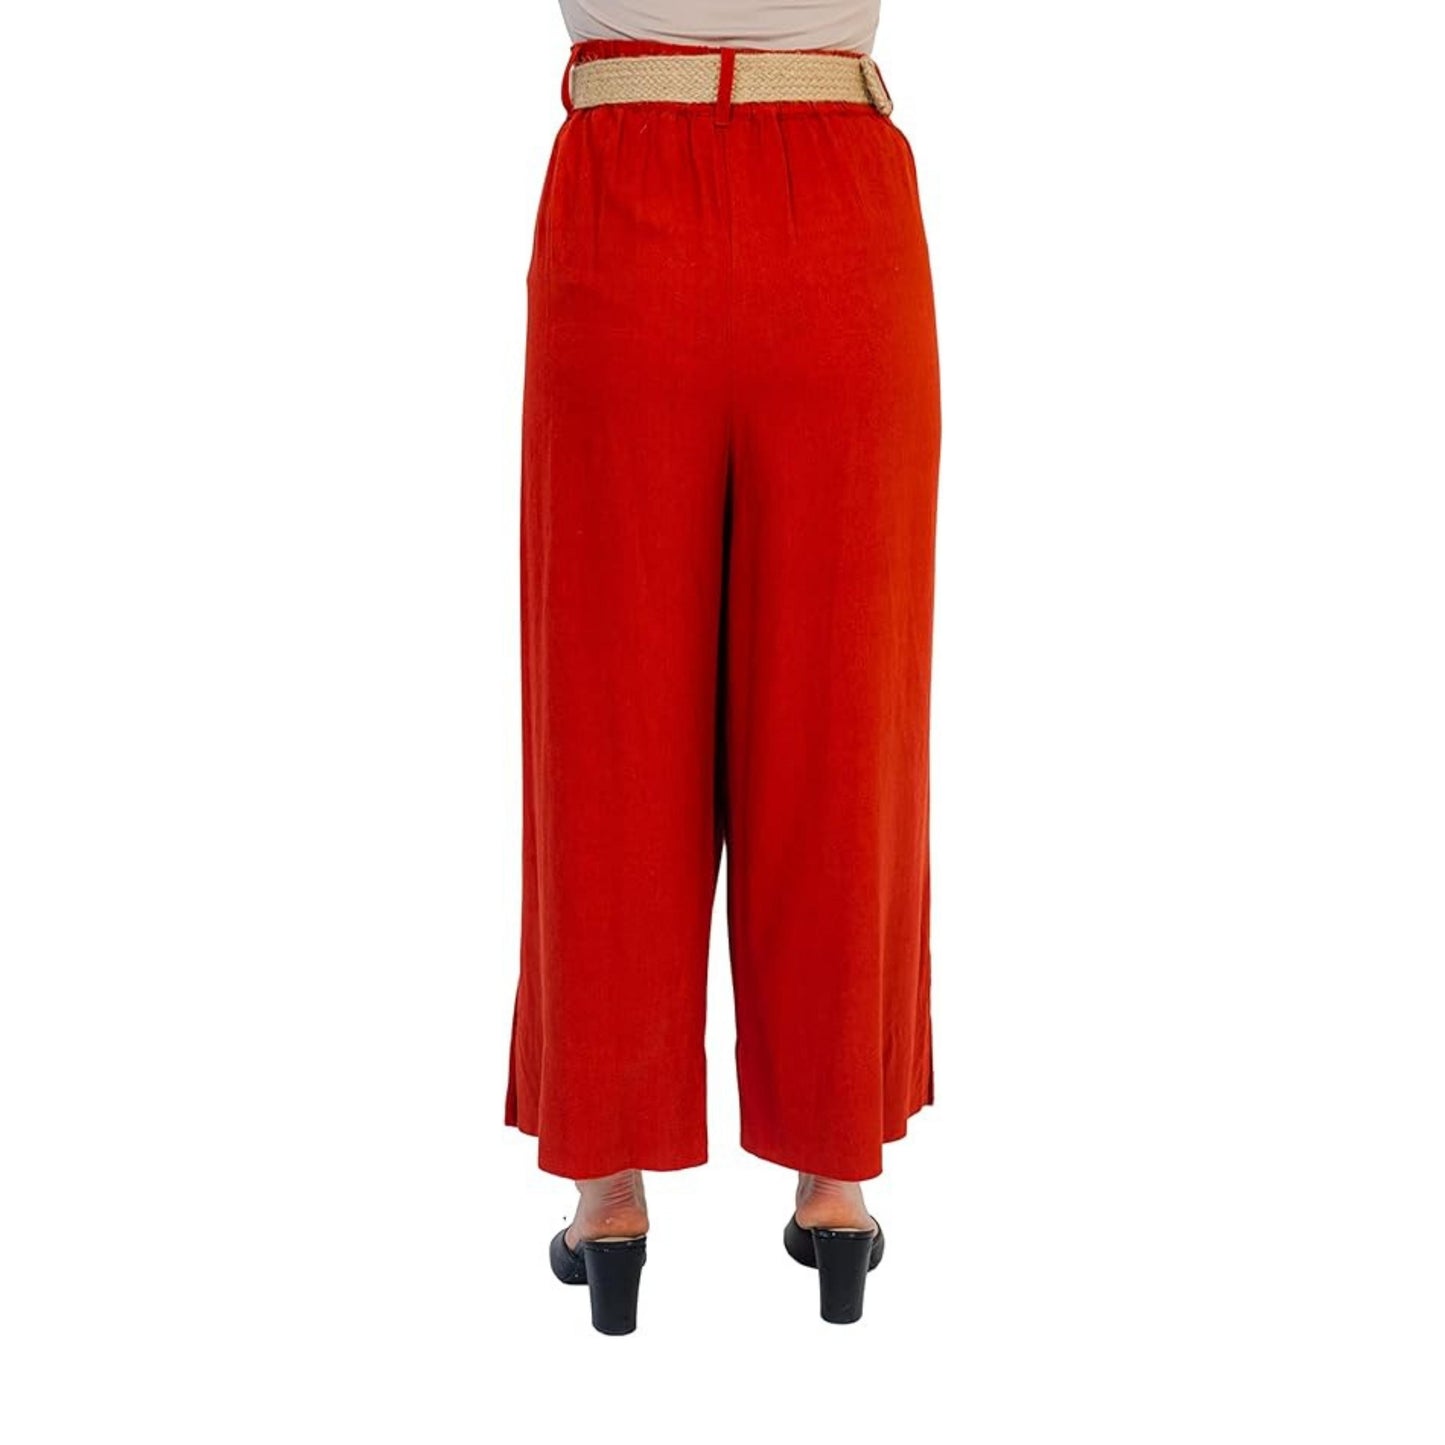 WOMENS SIZE 18 RED NWT VENEZIA BELTED CAPRIS